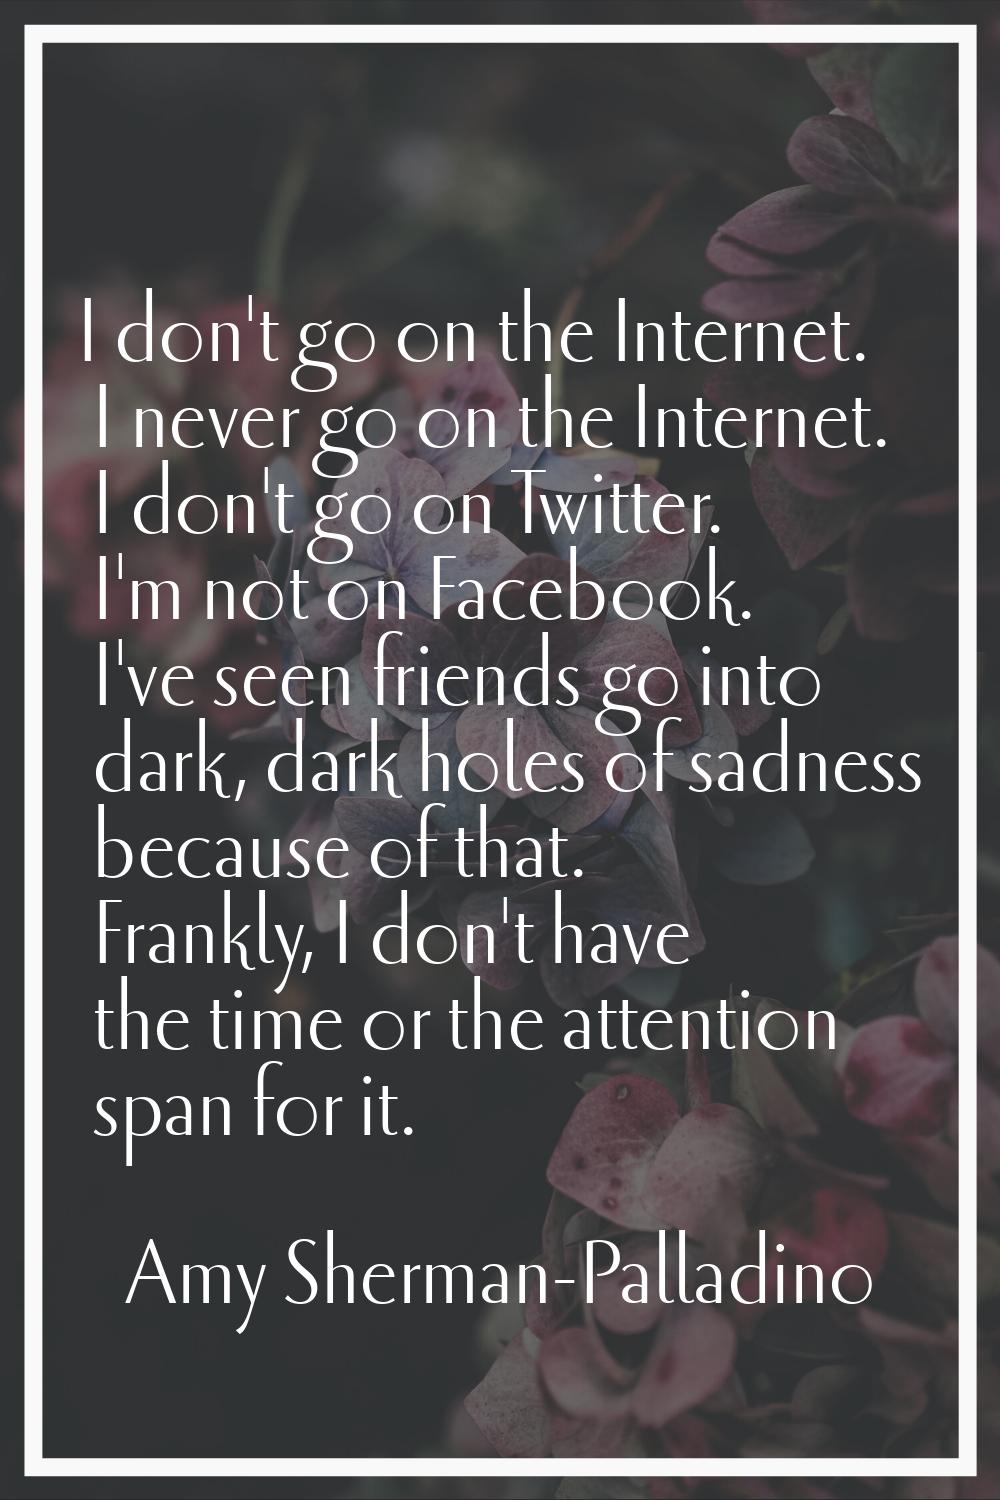 I don't go on the Internet. I never go on the Internet. I don't go on Twitter. I'm not on Facebook.